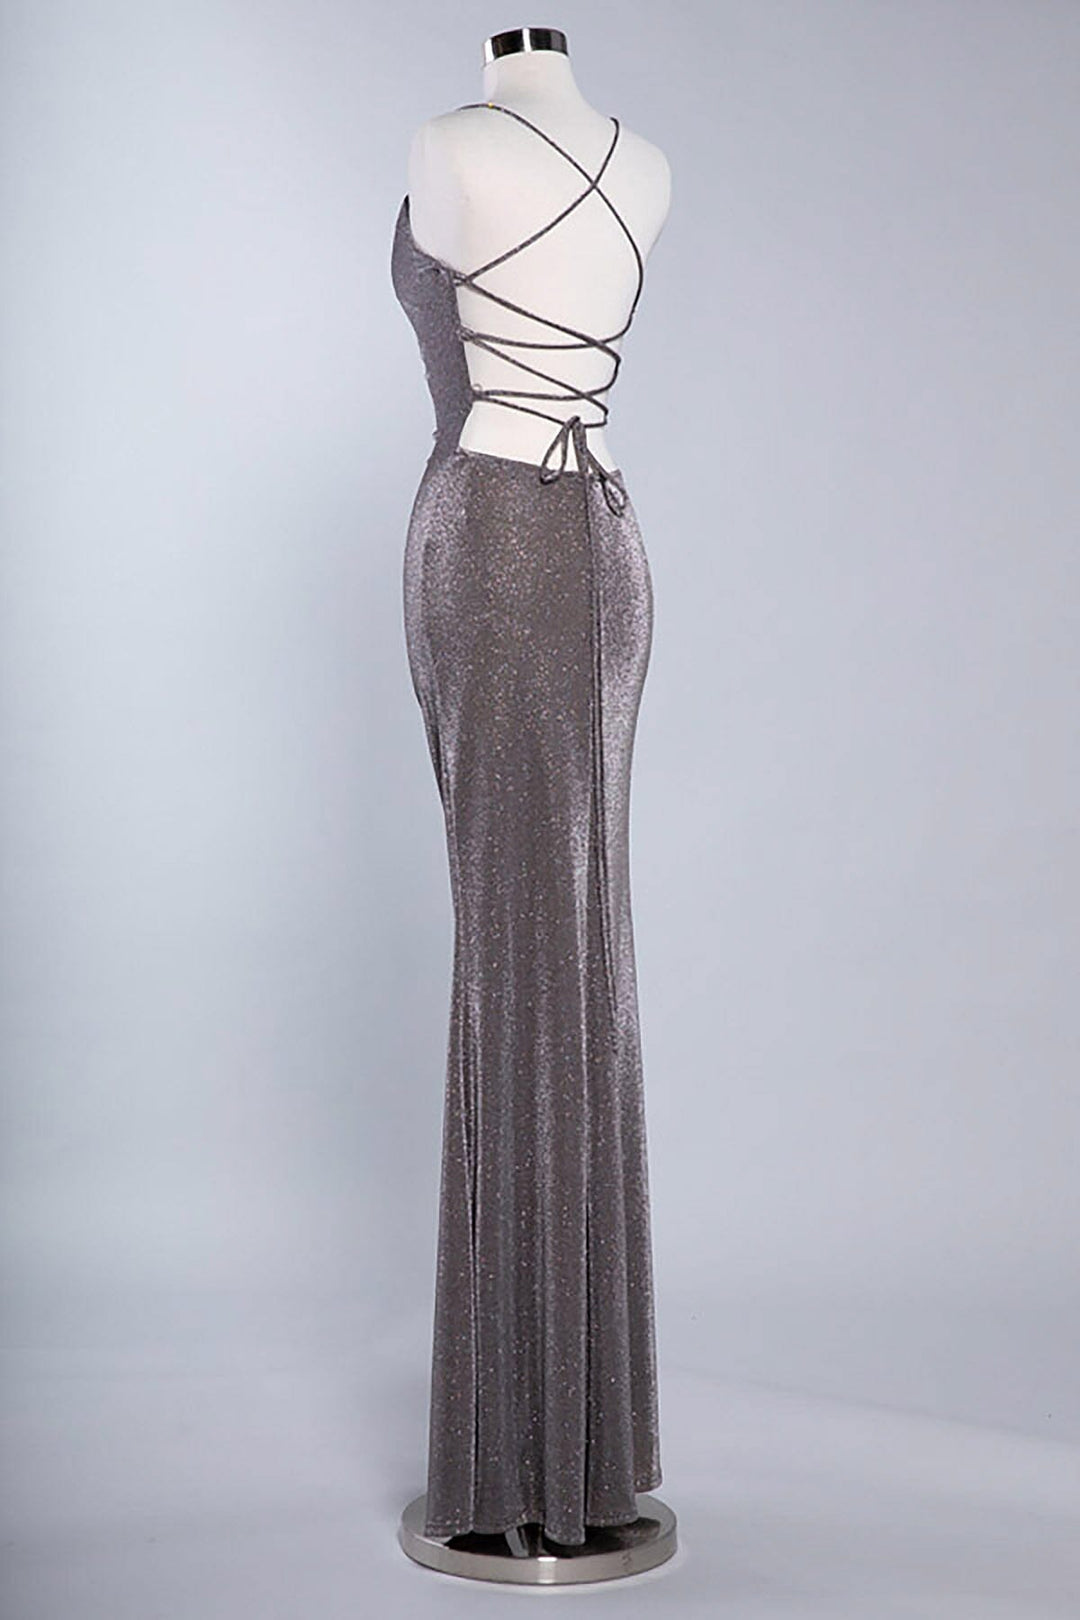 Fitted Metallic Glitter Cowl Neck Slit Gown by Coya D562